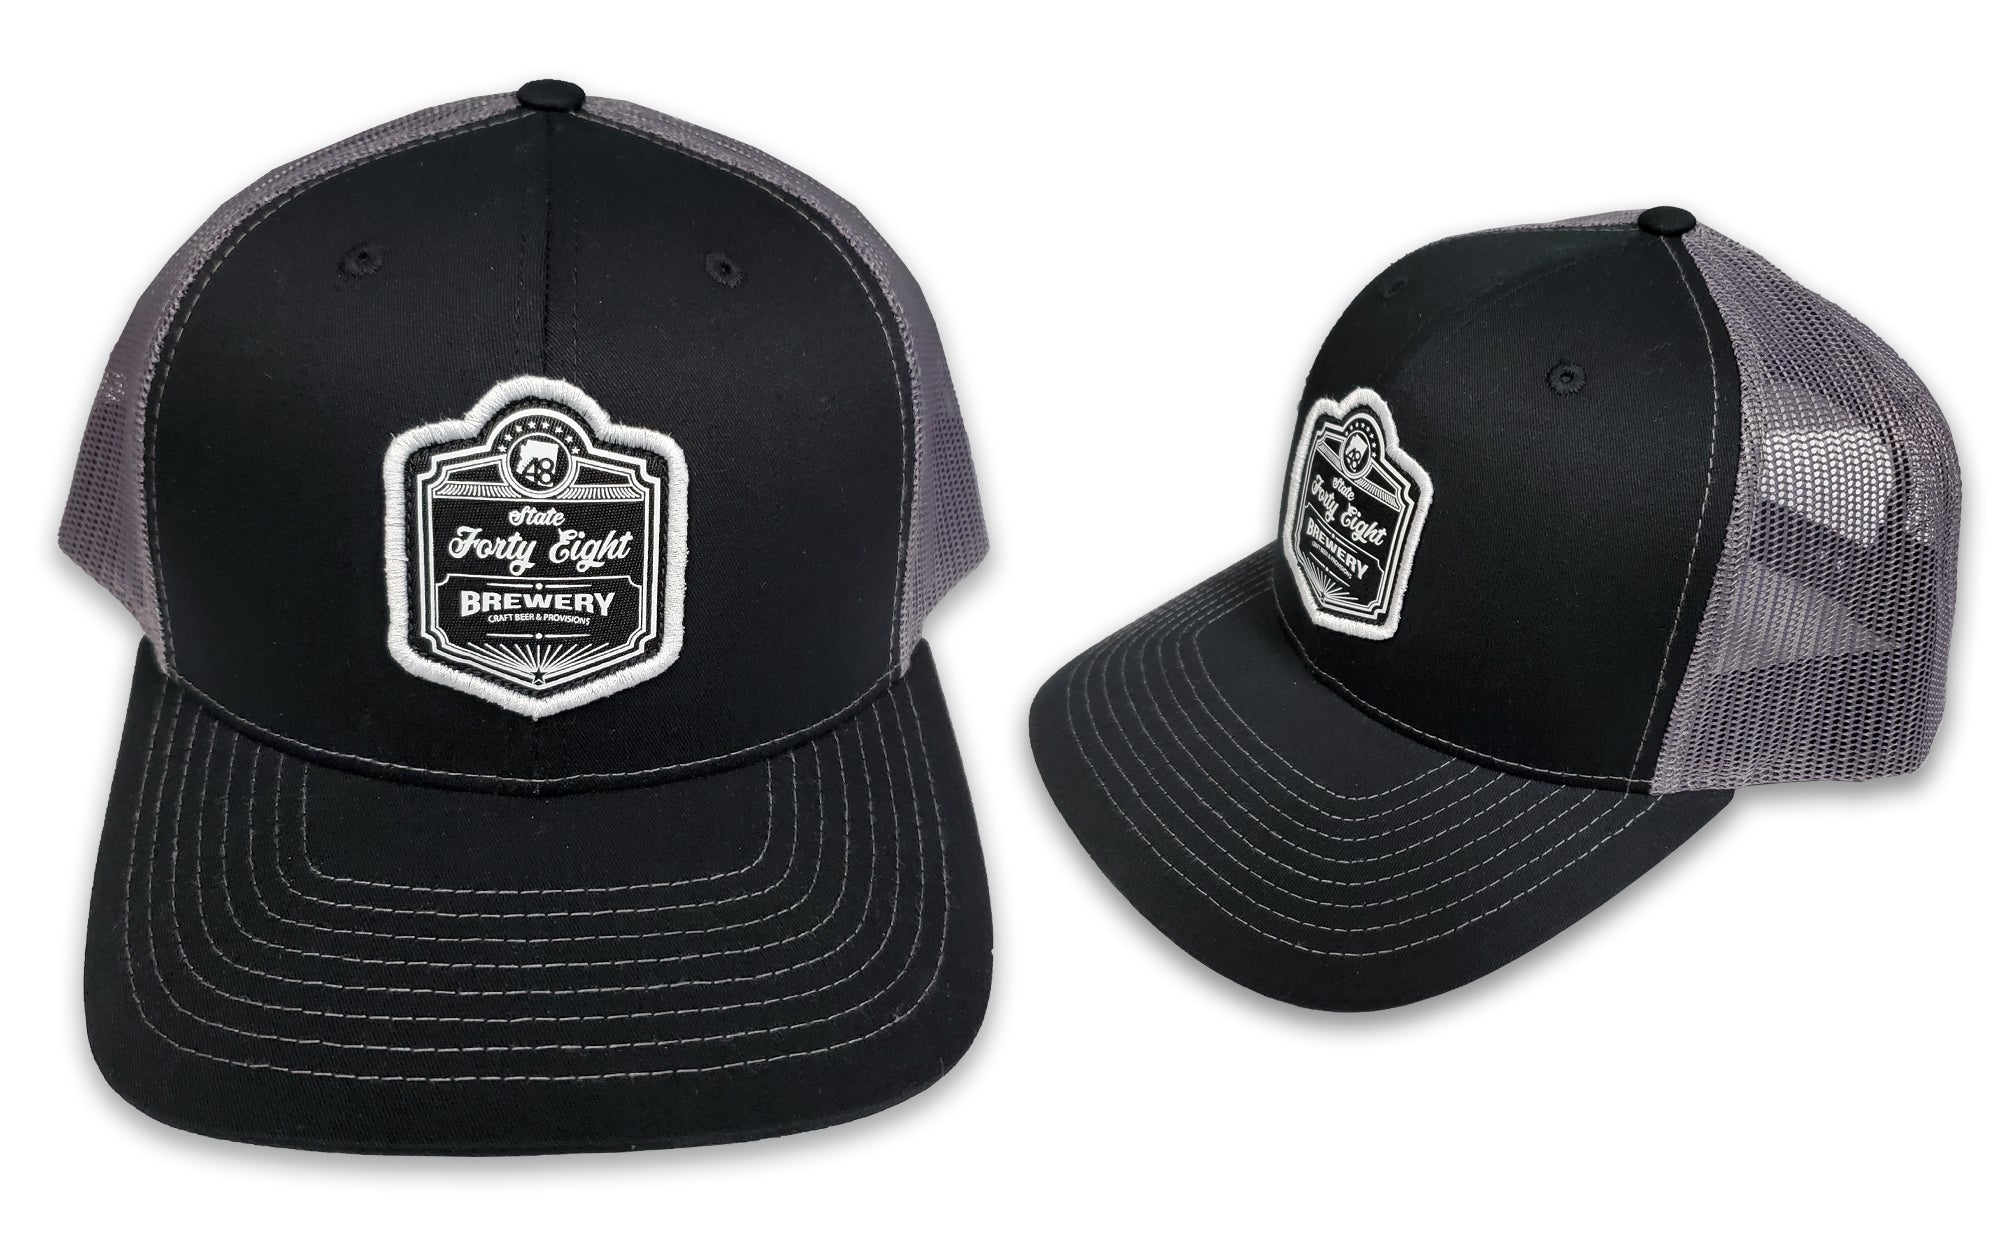 State 48 Trucker Snapback Patch Hat (Black/Charcoal Mesh)